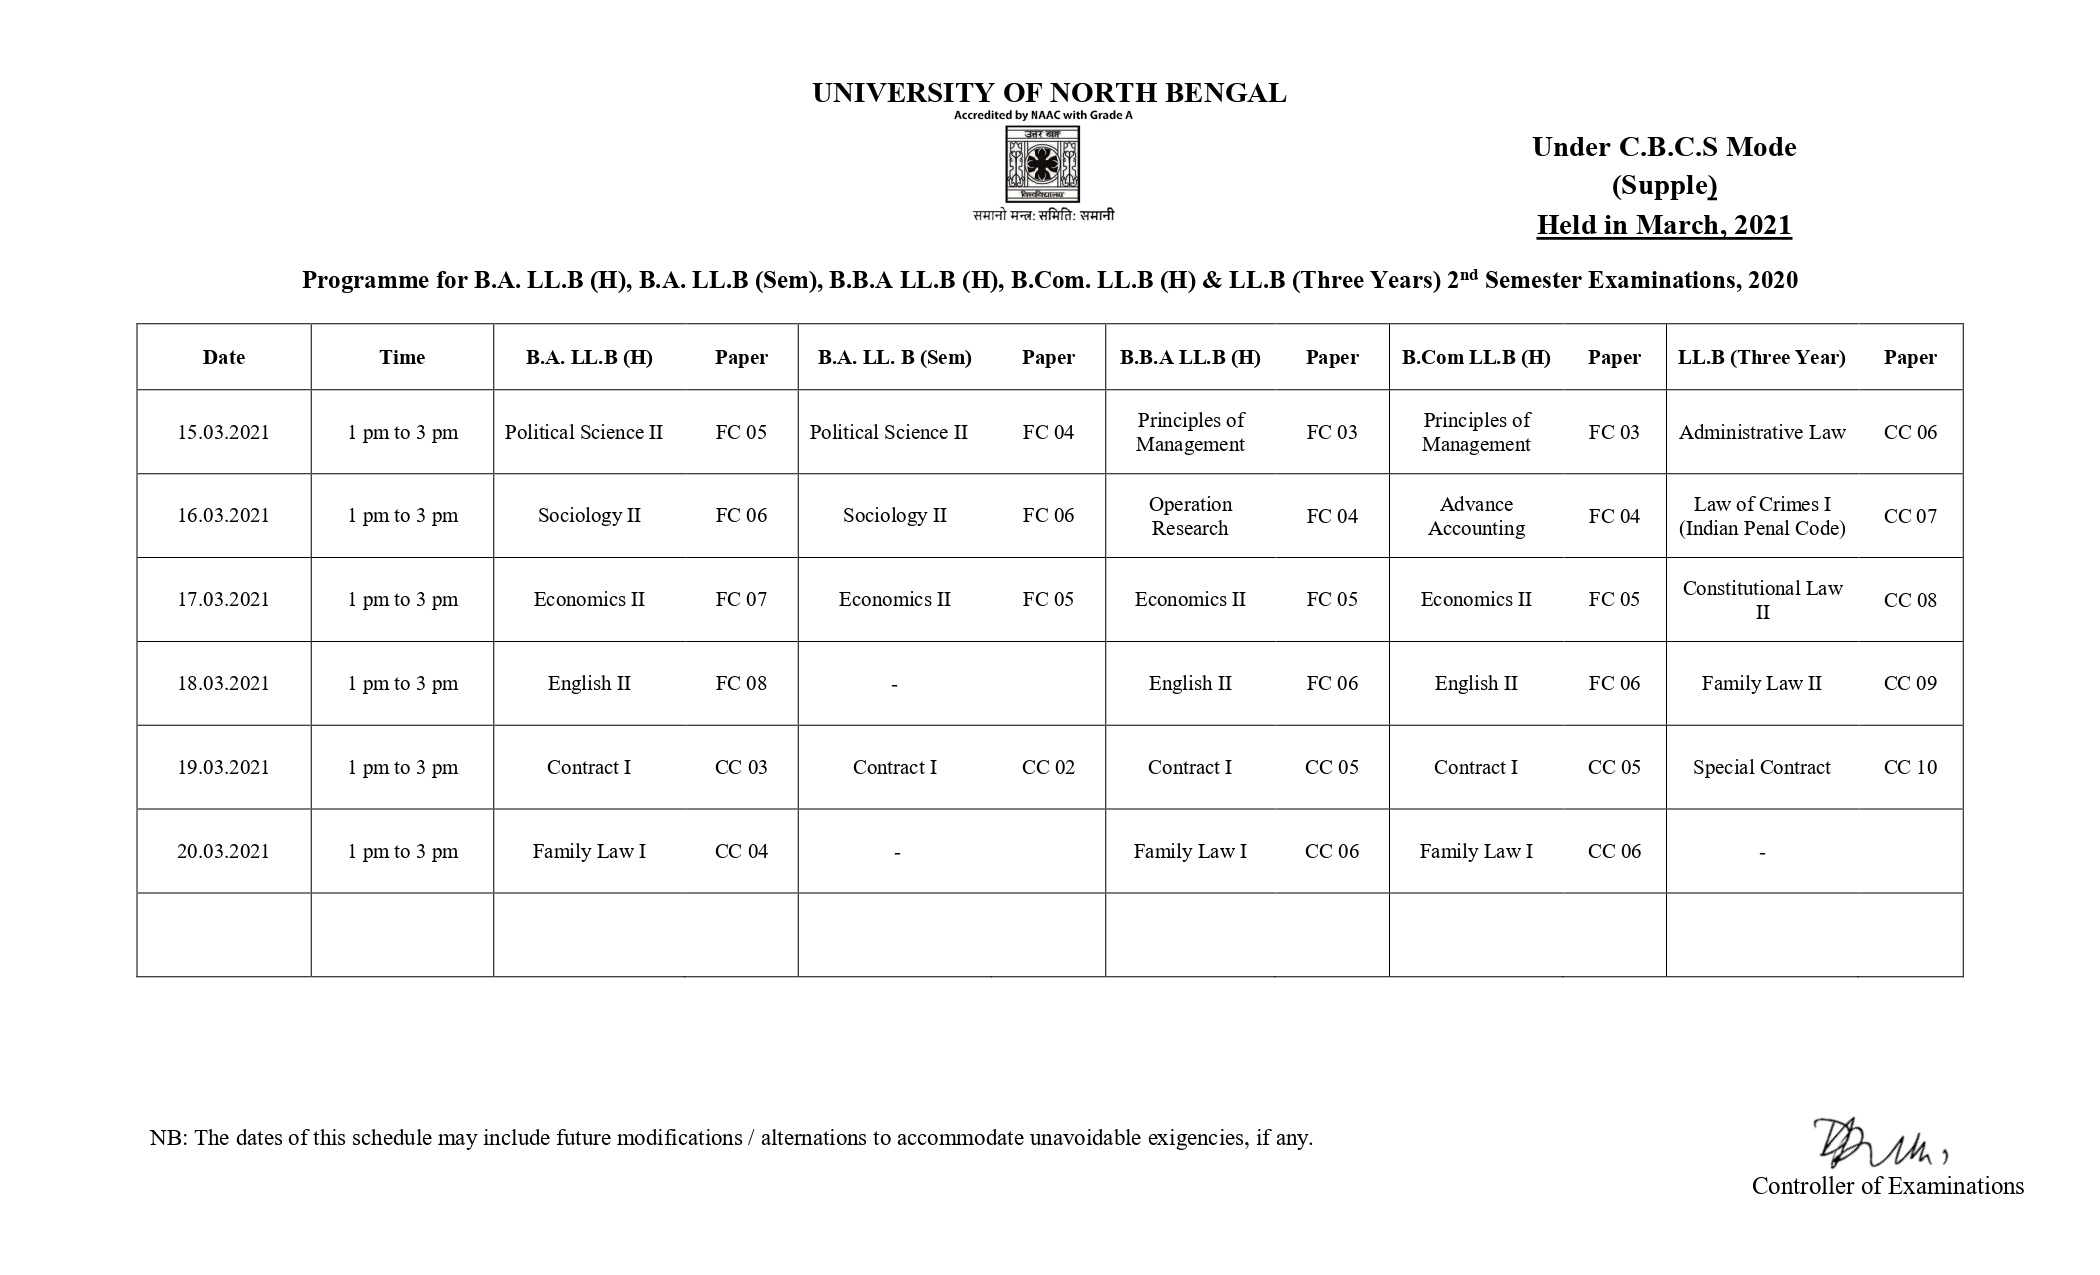 EXAMINATION (MARCH-21) SCHEDULE CBCS MODE SEMESTER-II